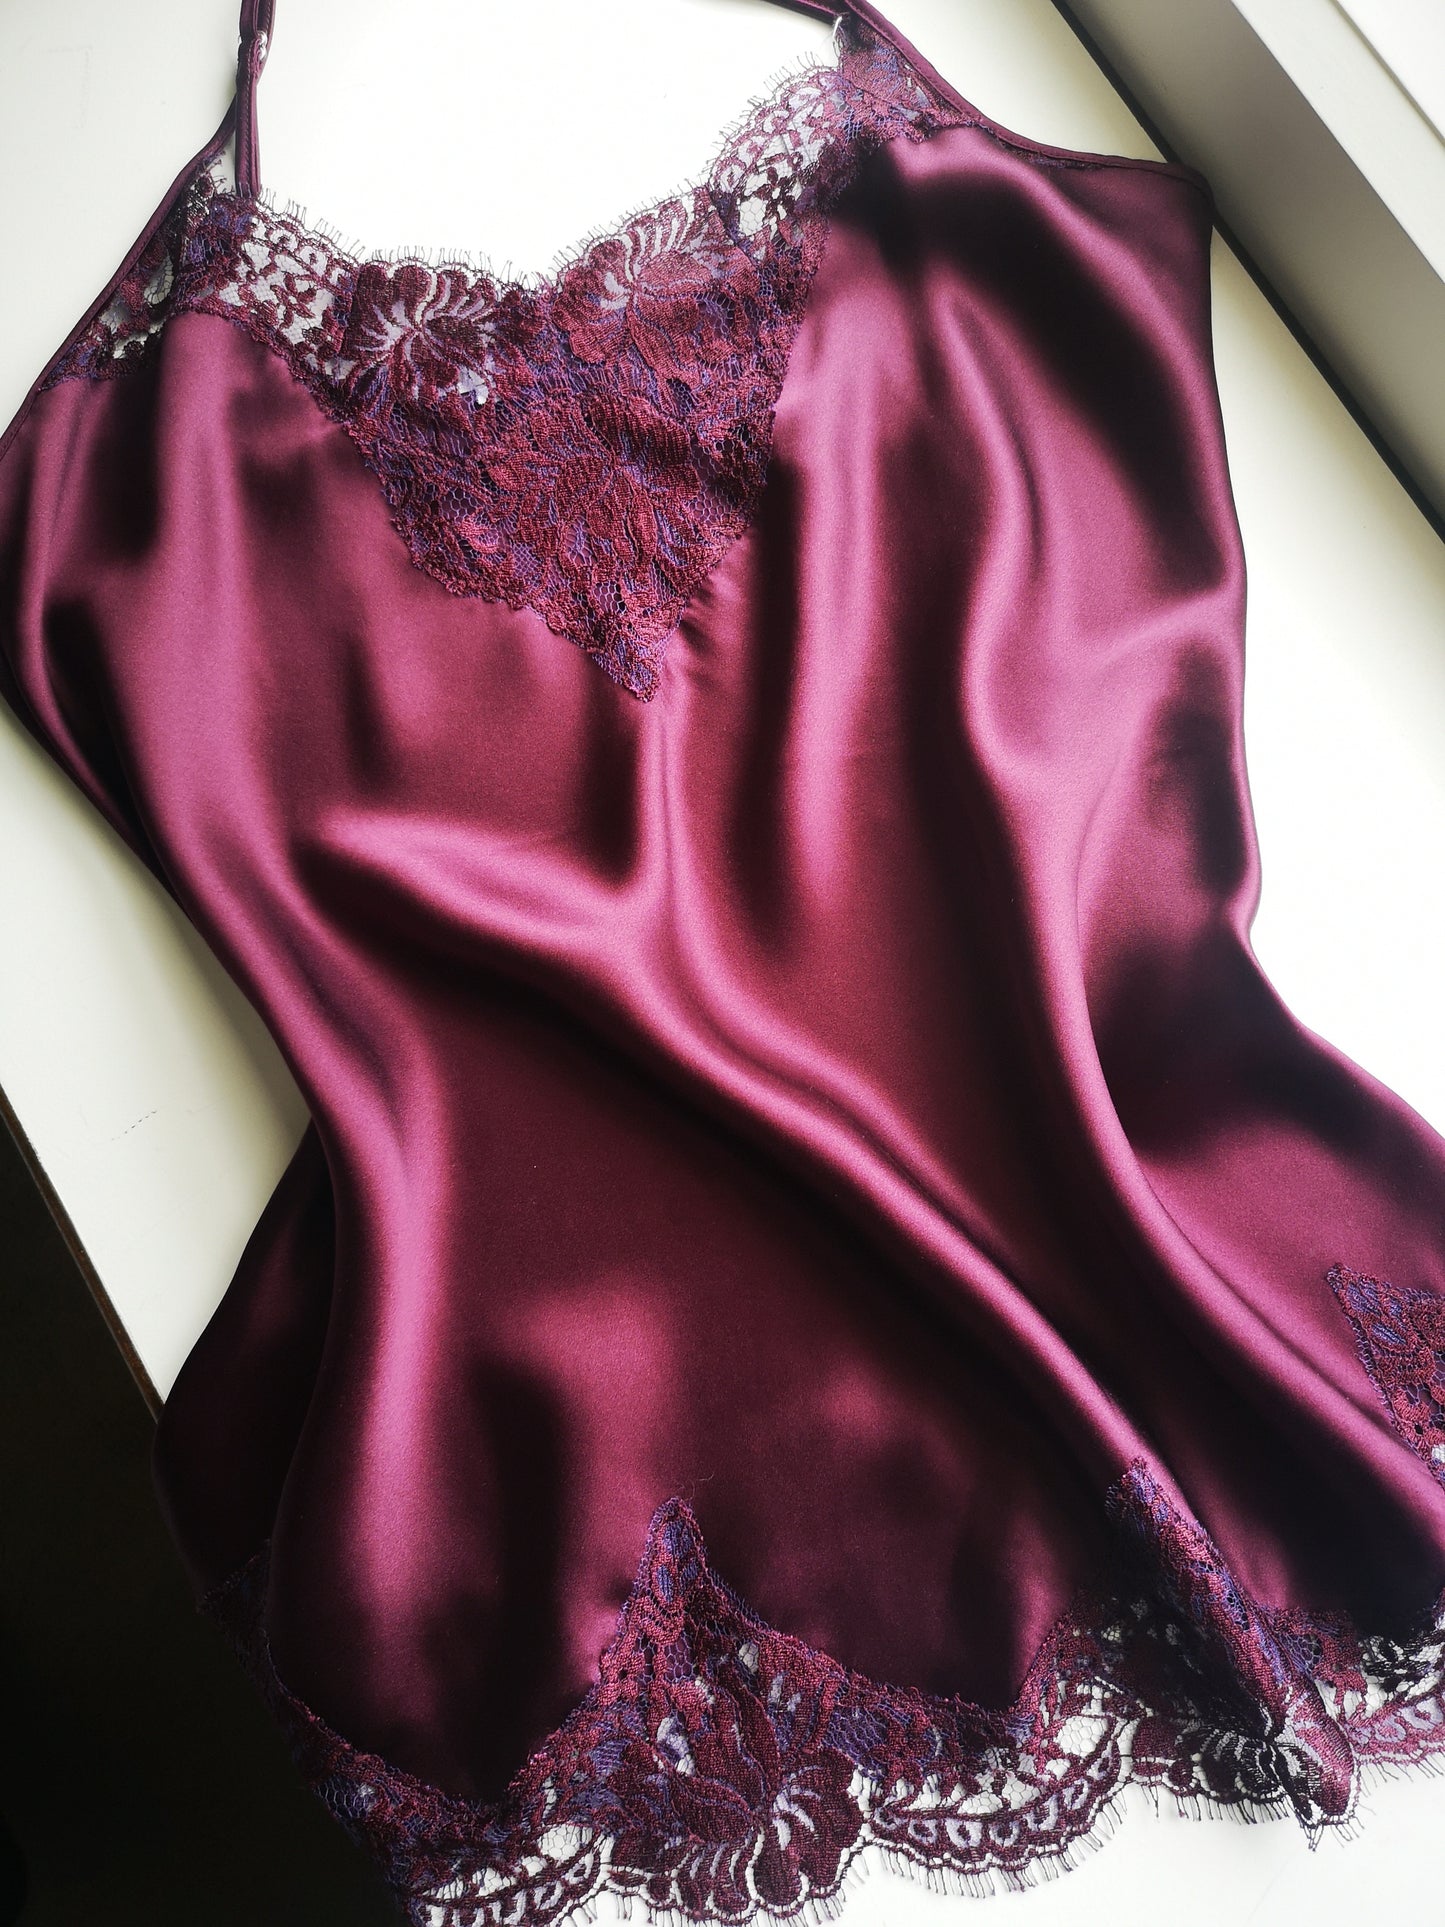 plum silk camisole made in melbourne at the natalie Begg Atelier. Trimmed with french lace. A truly exquisite piece that comforts you.